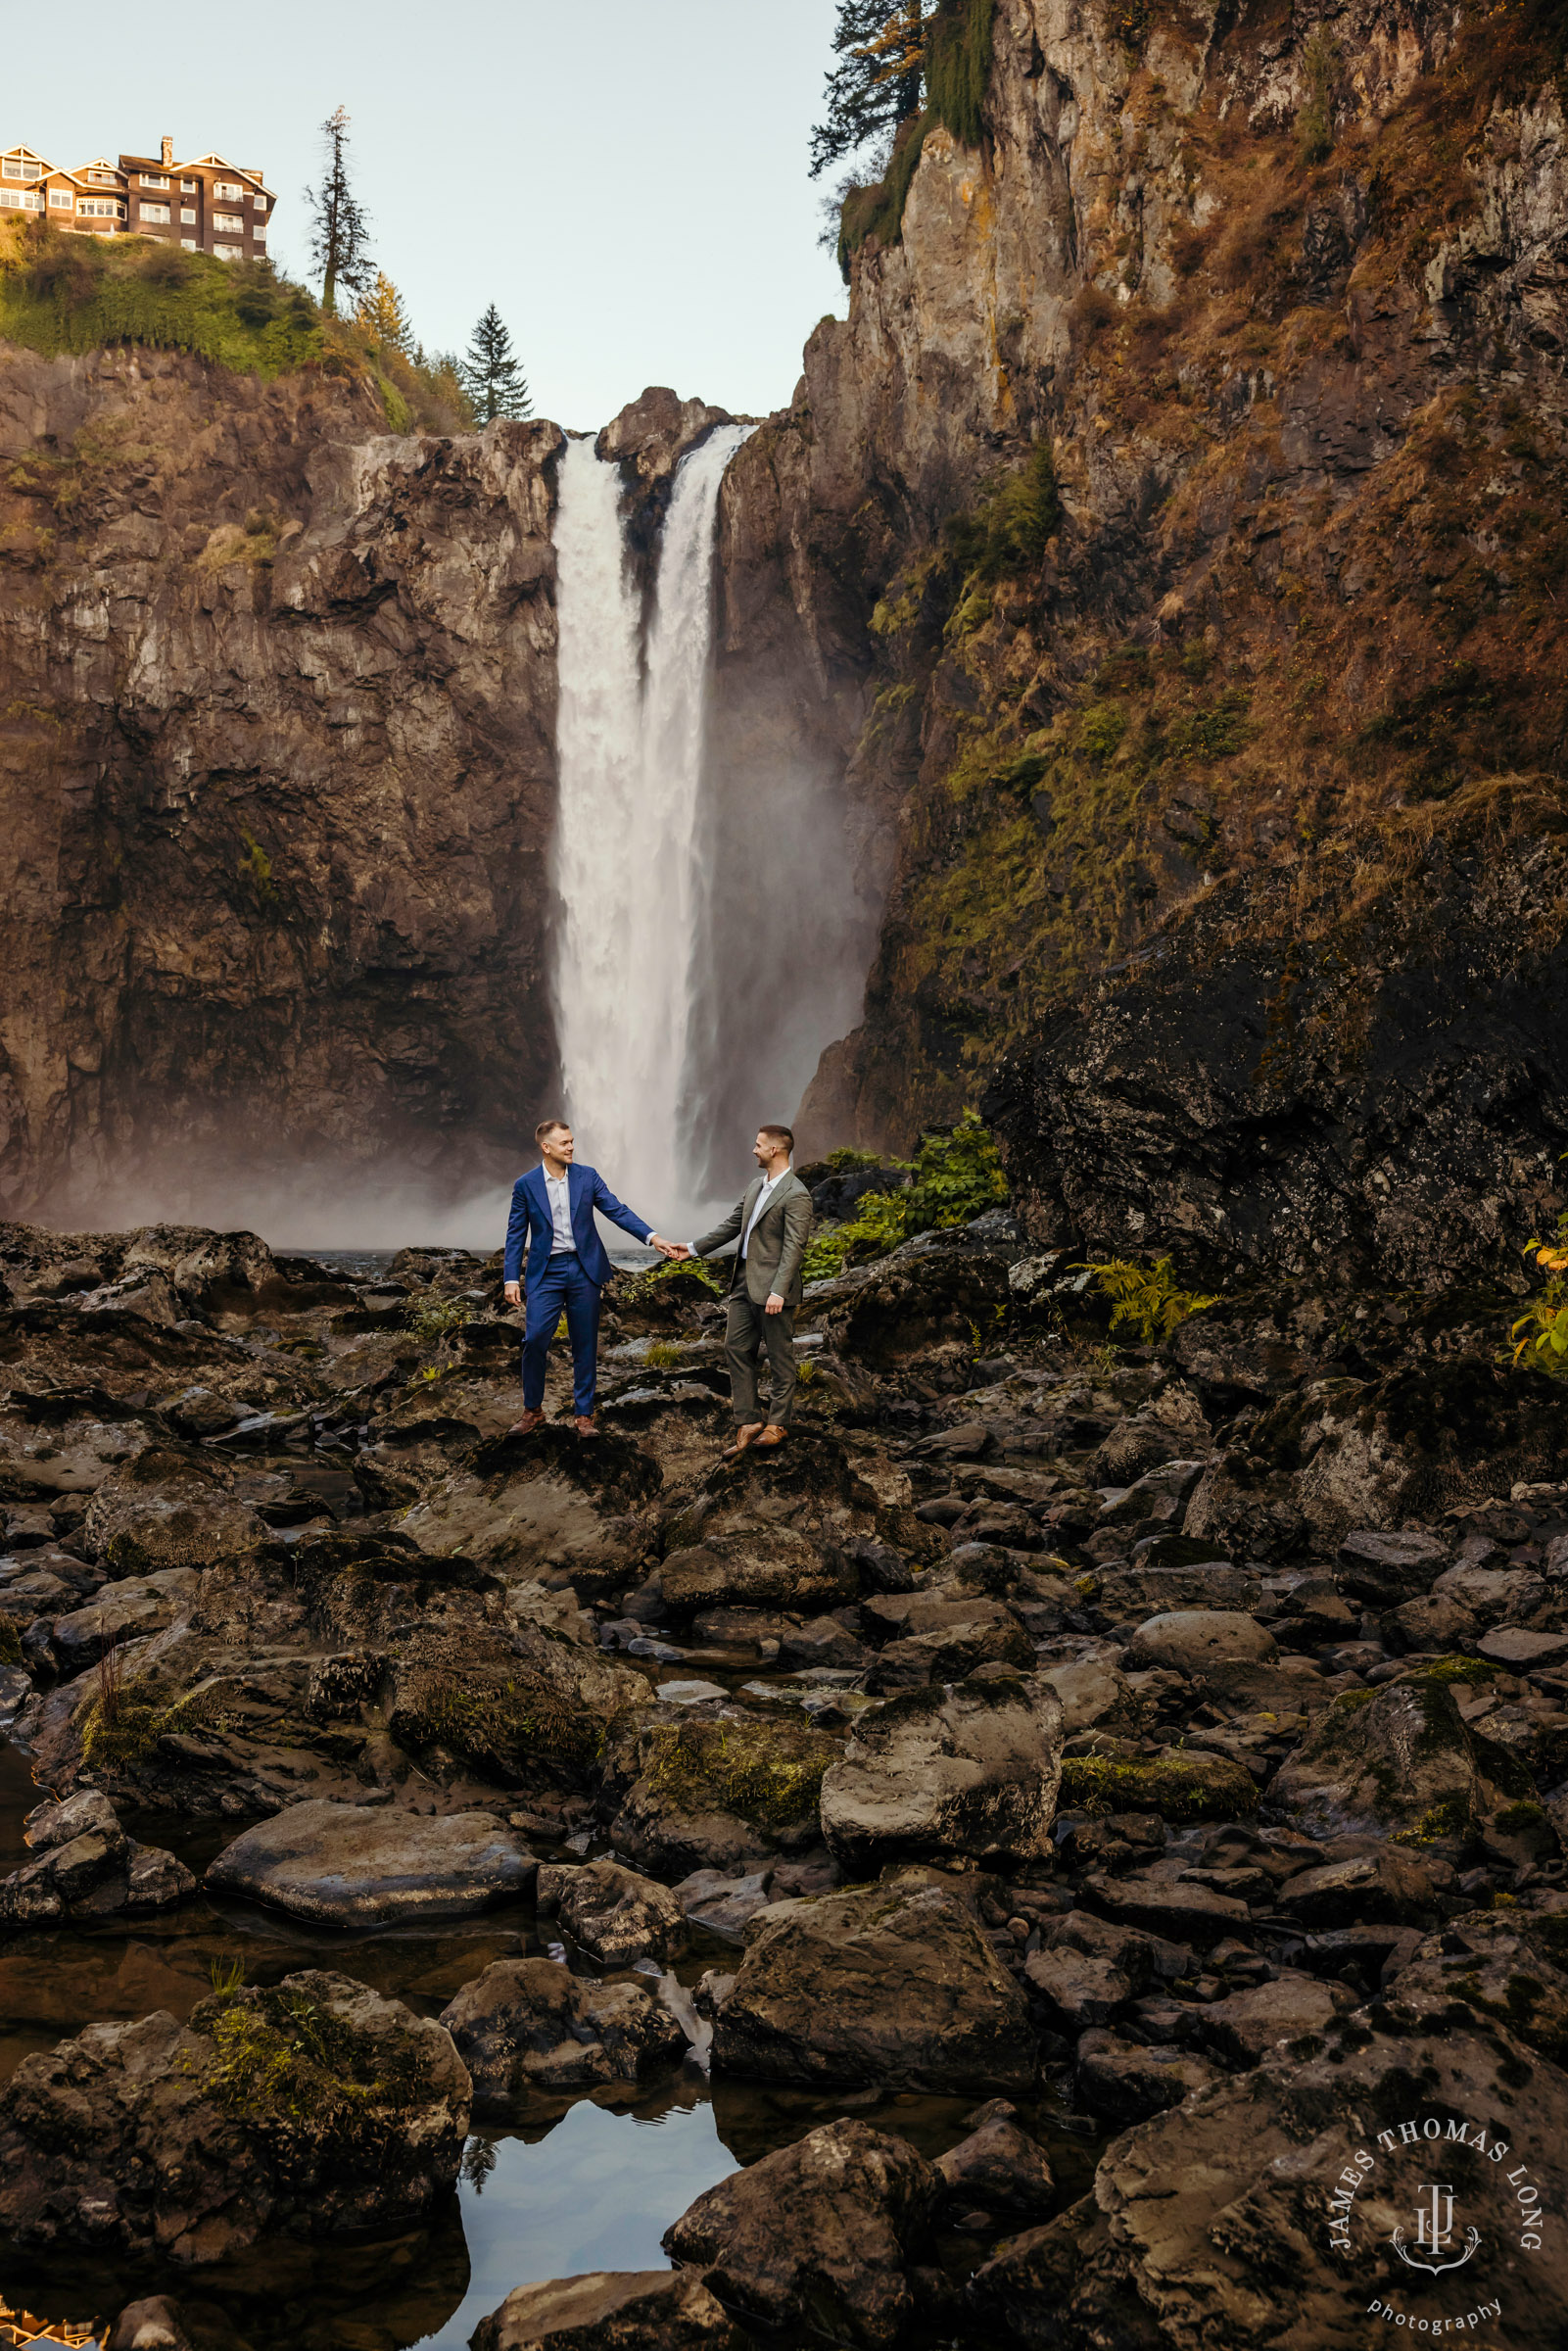 Snoqualmie Falls day before the wedding by Snoqualmie wedding photographer James Thomas Long Photography